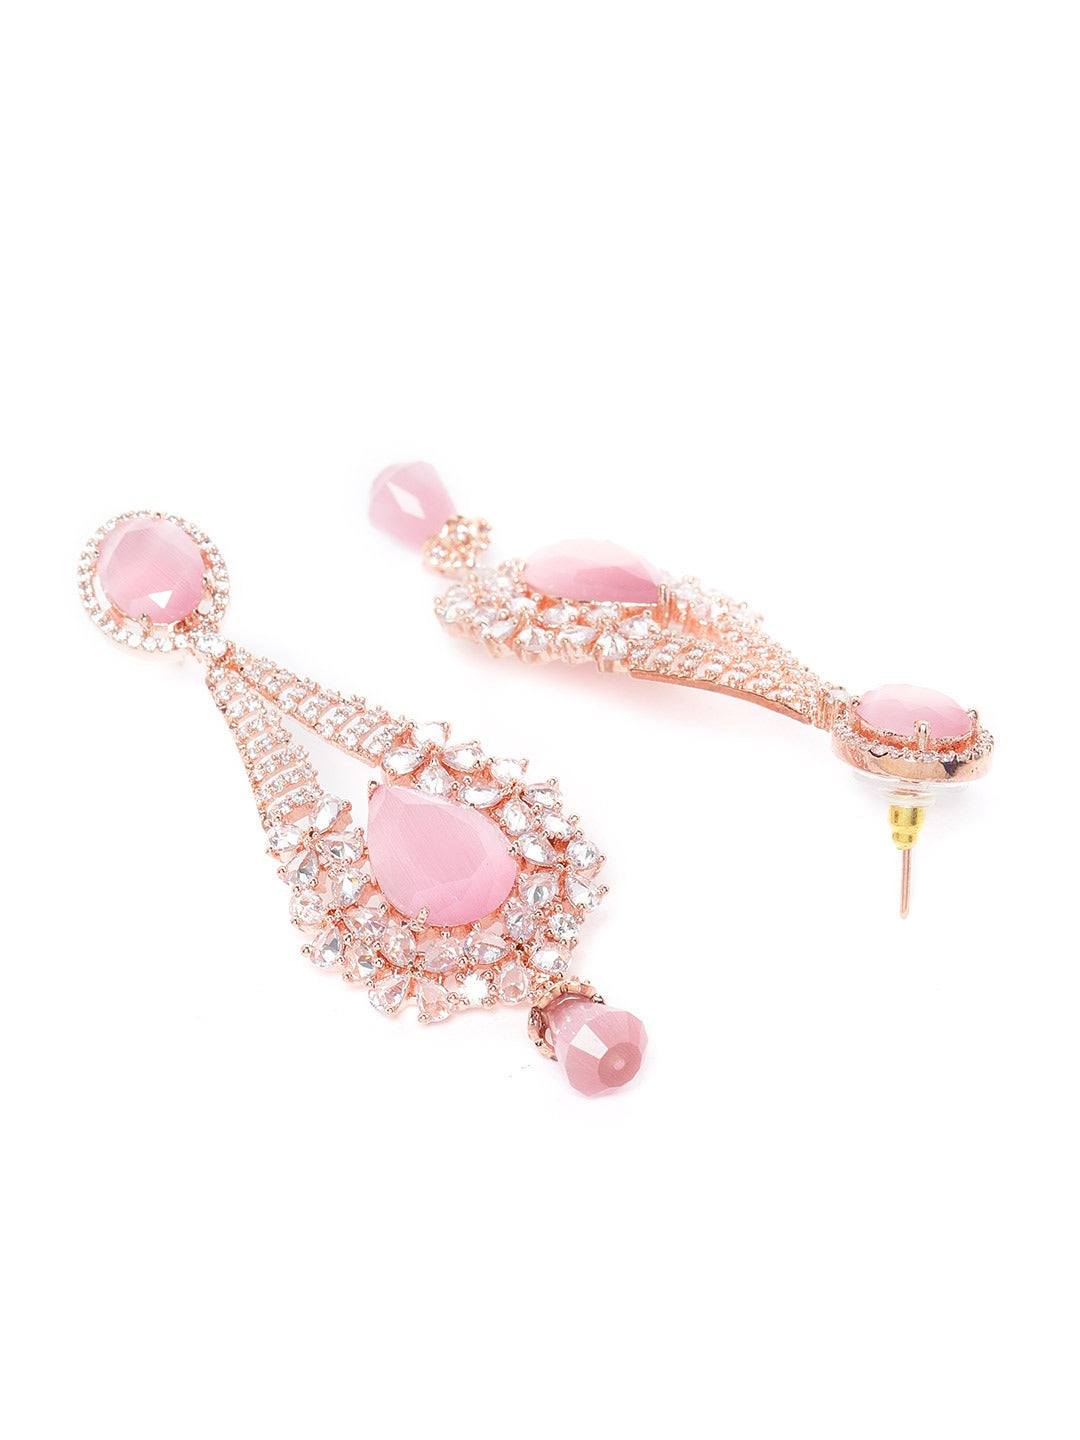 Rose Gold-Plated AD Studded Beaded Handcrafted Teardrop Shaped Drop Earrings